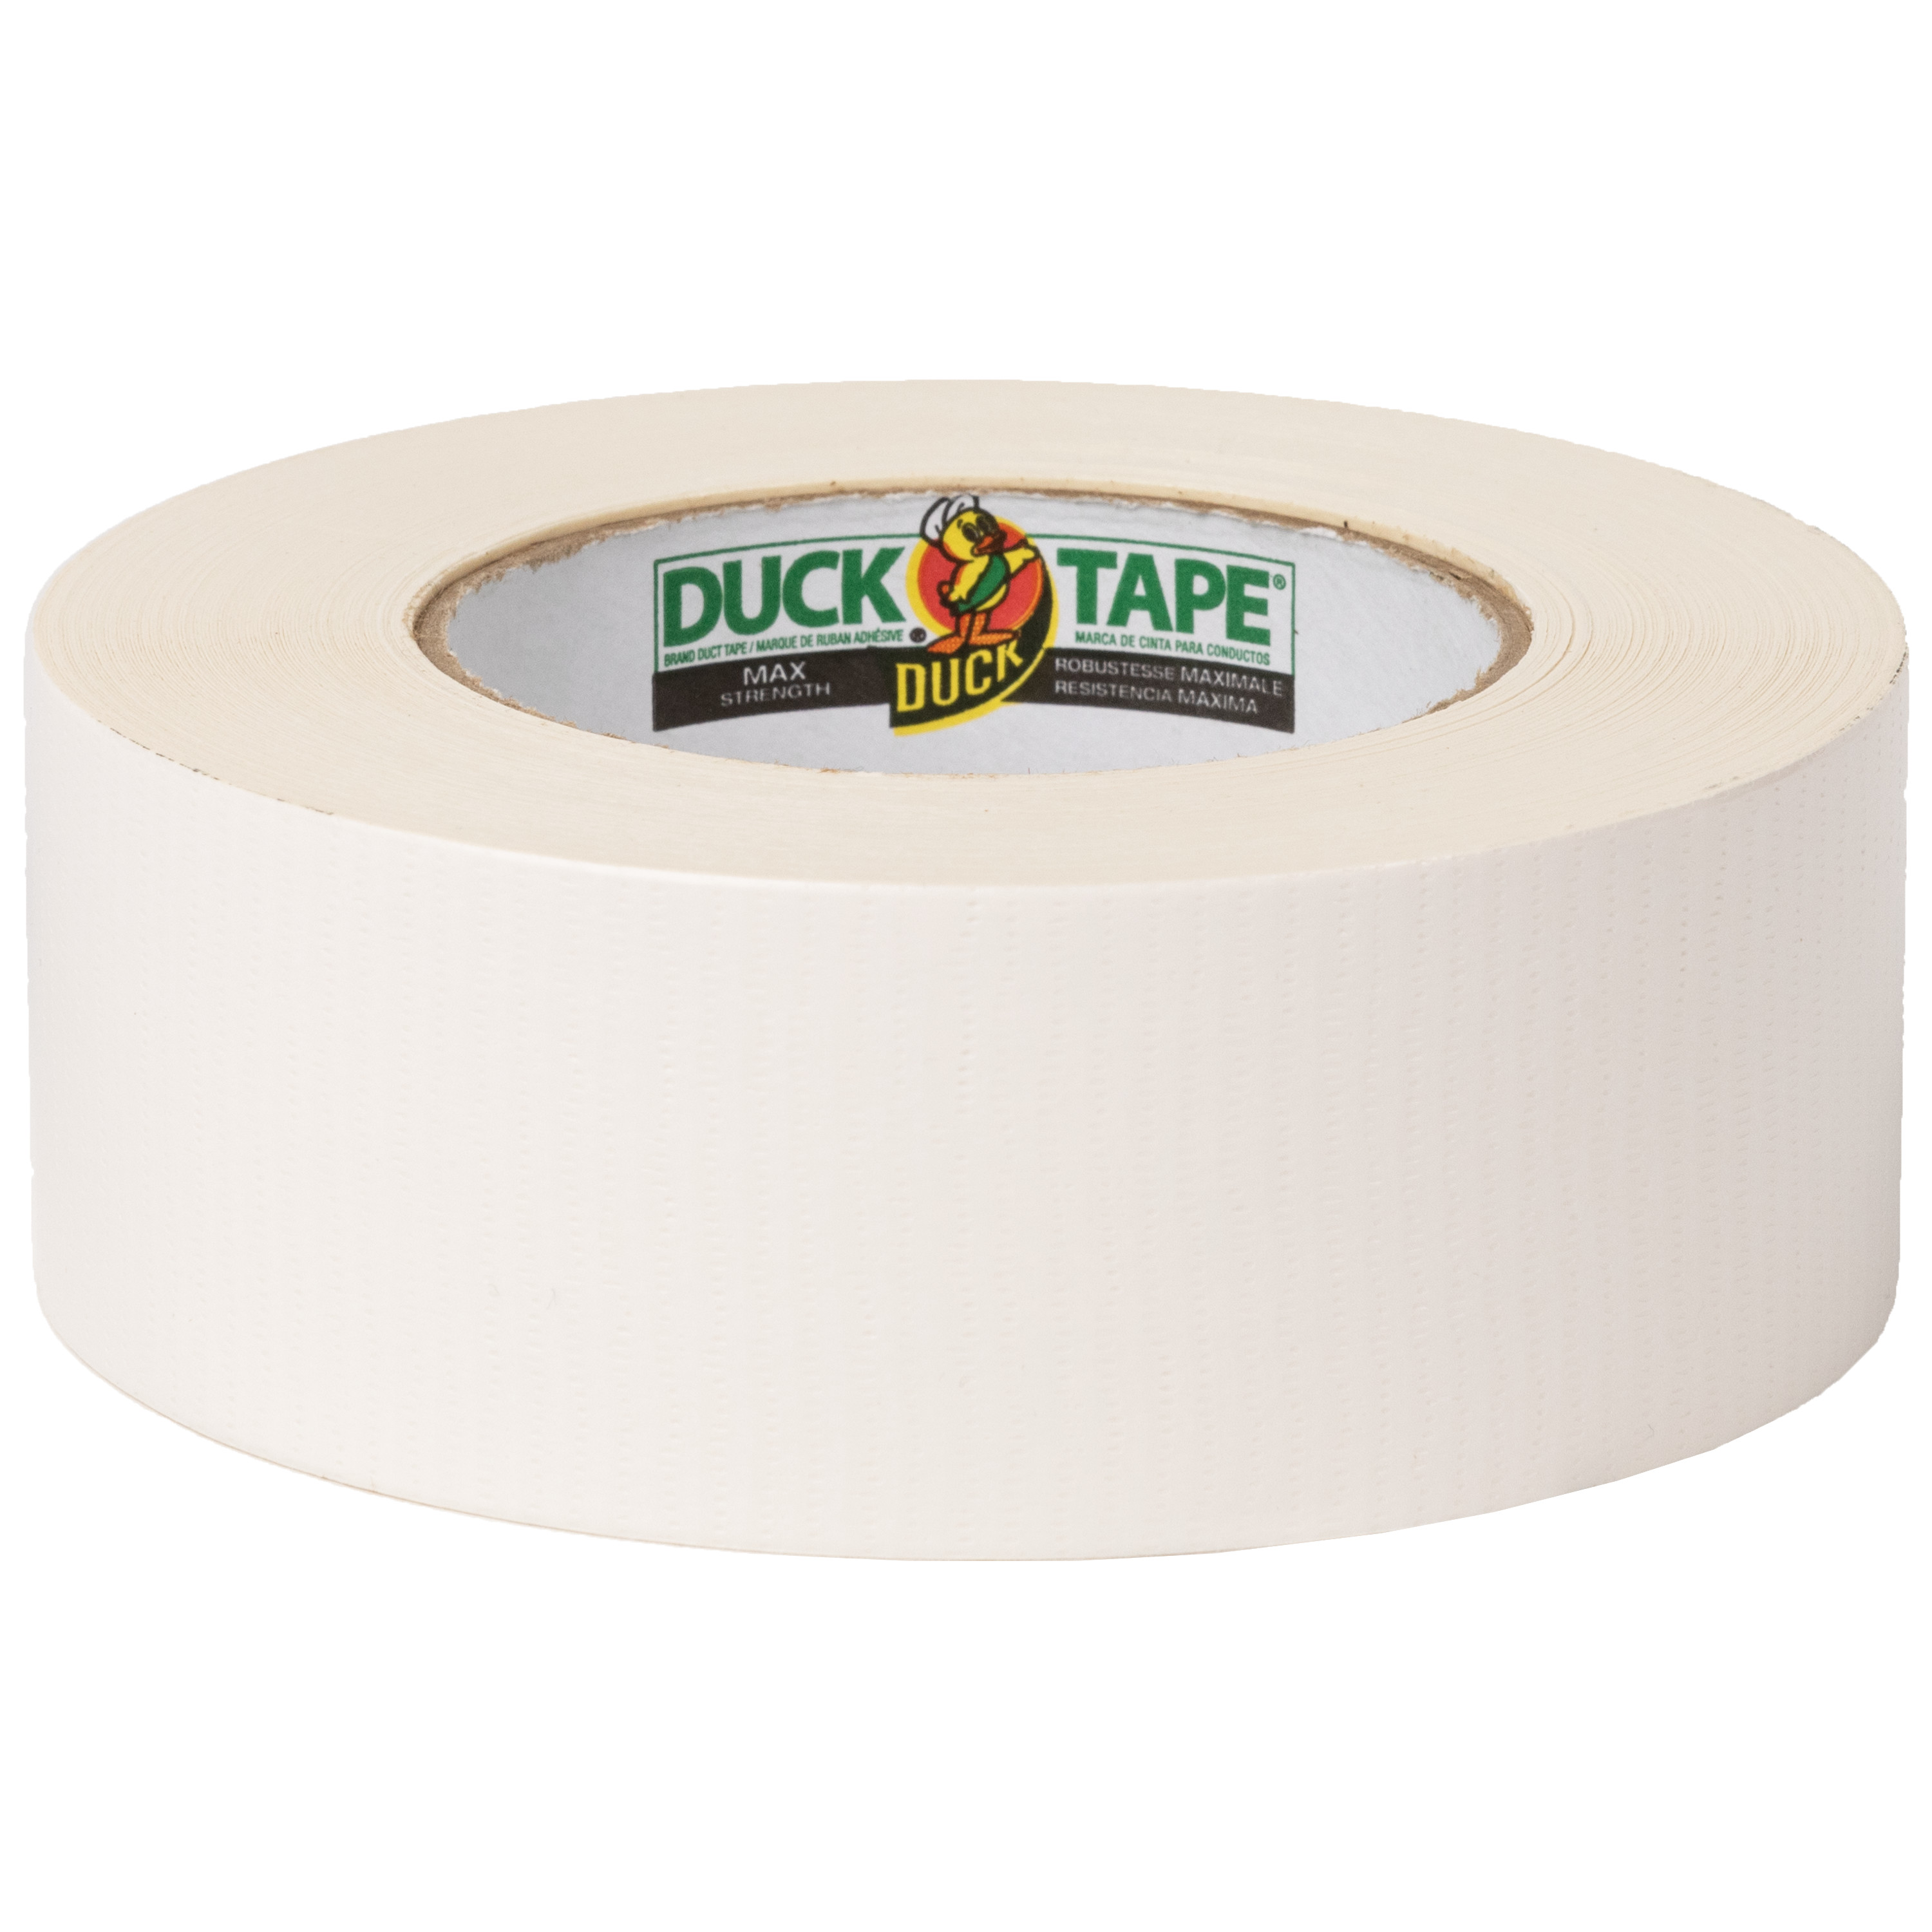 Duck Max Strength 1.88 in. x 35 yd. White Duct Tape, 2 Pack